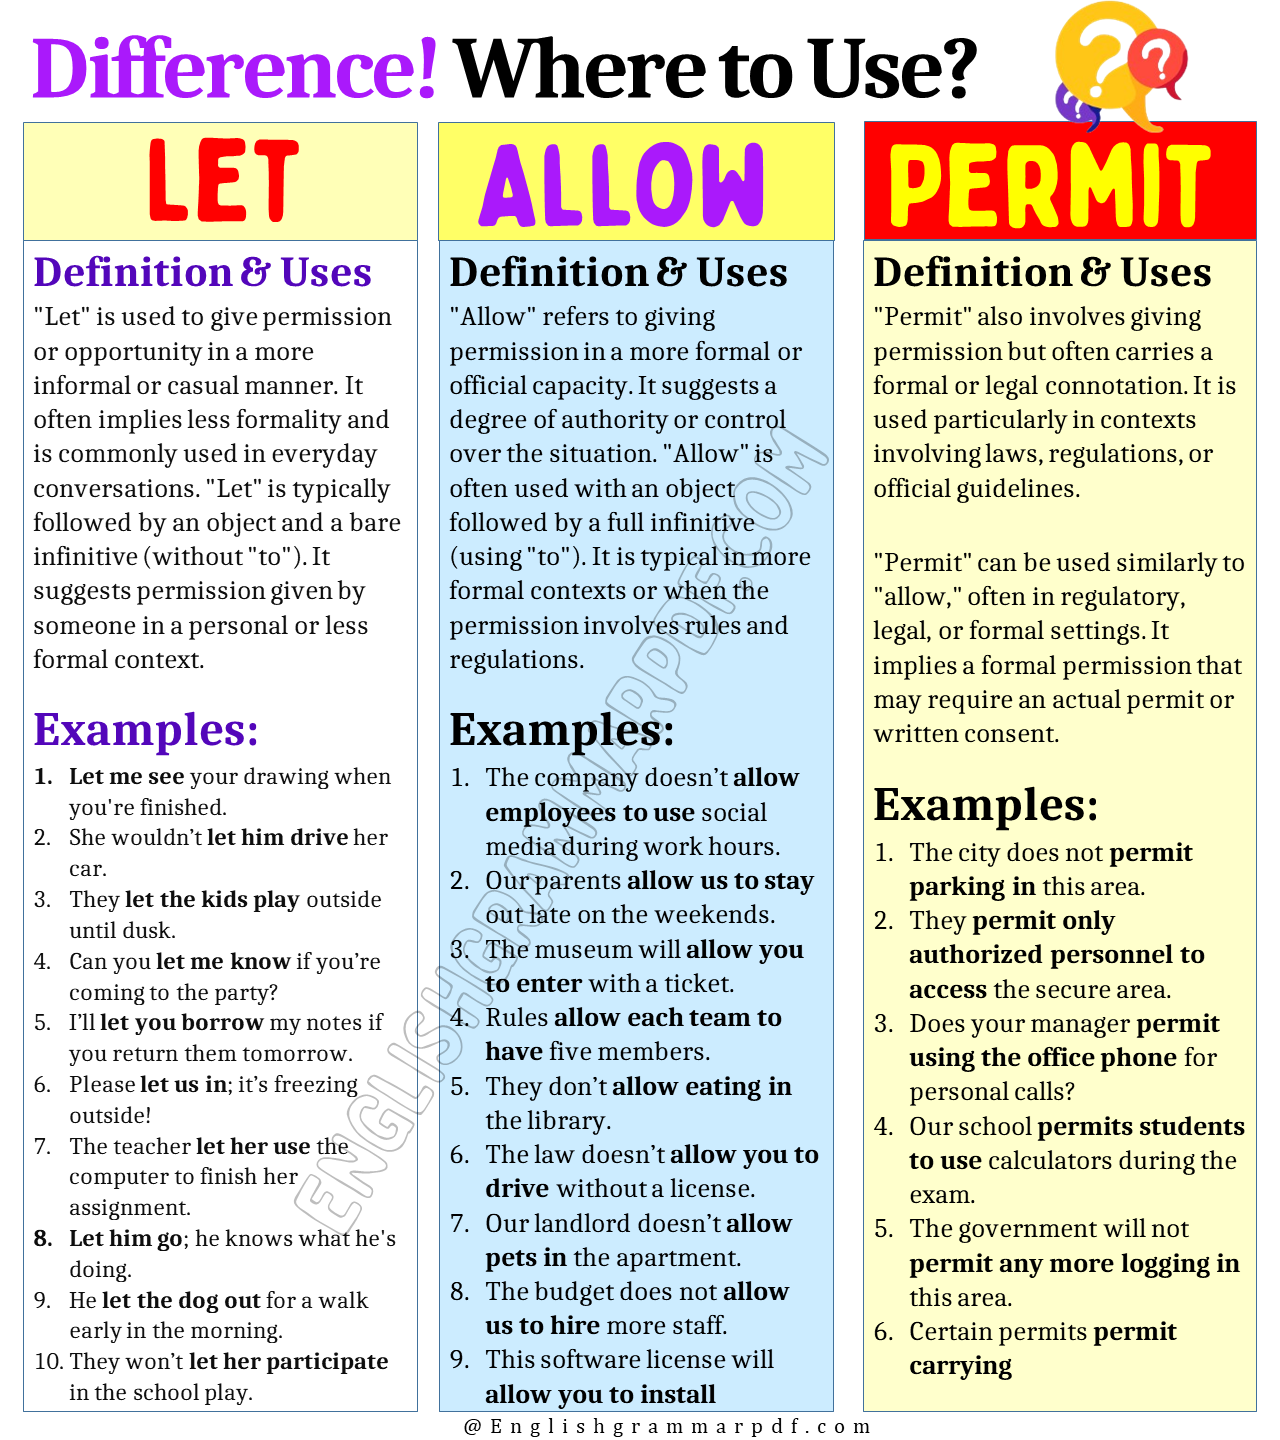 Difference between Let, Allow, and Permit